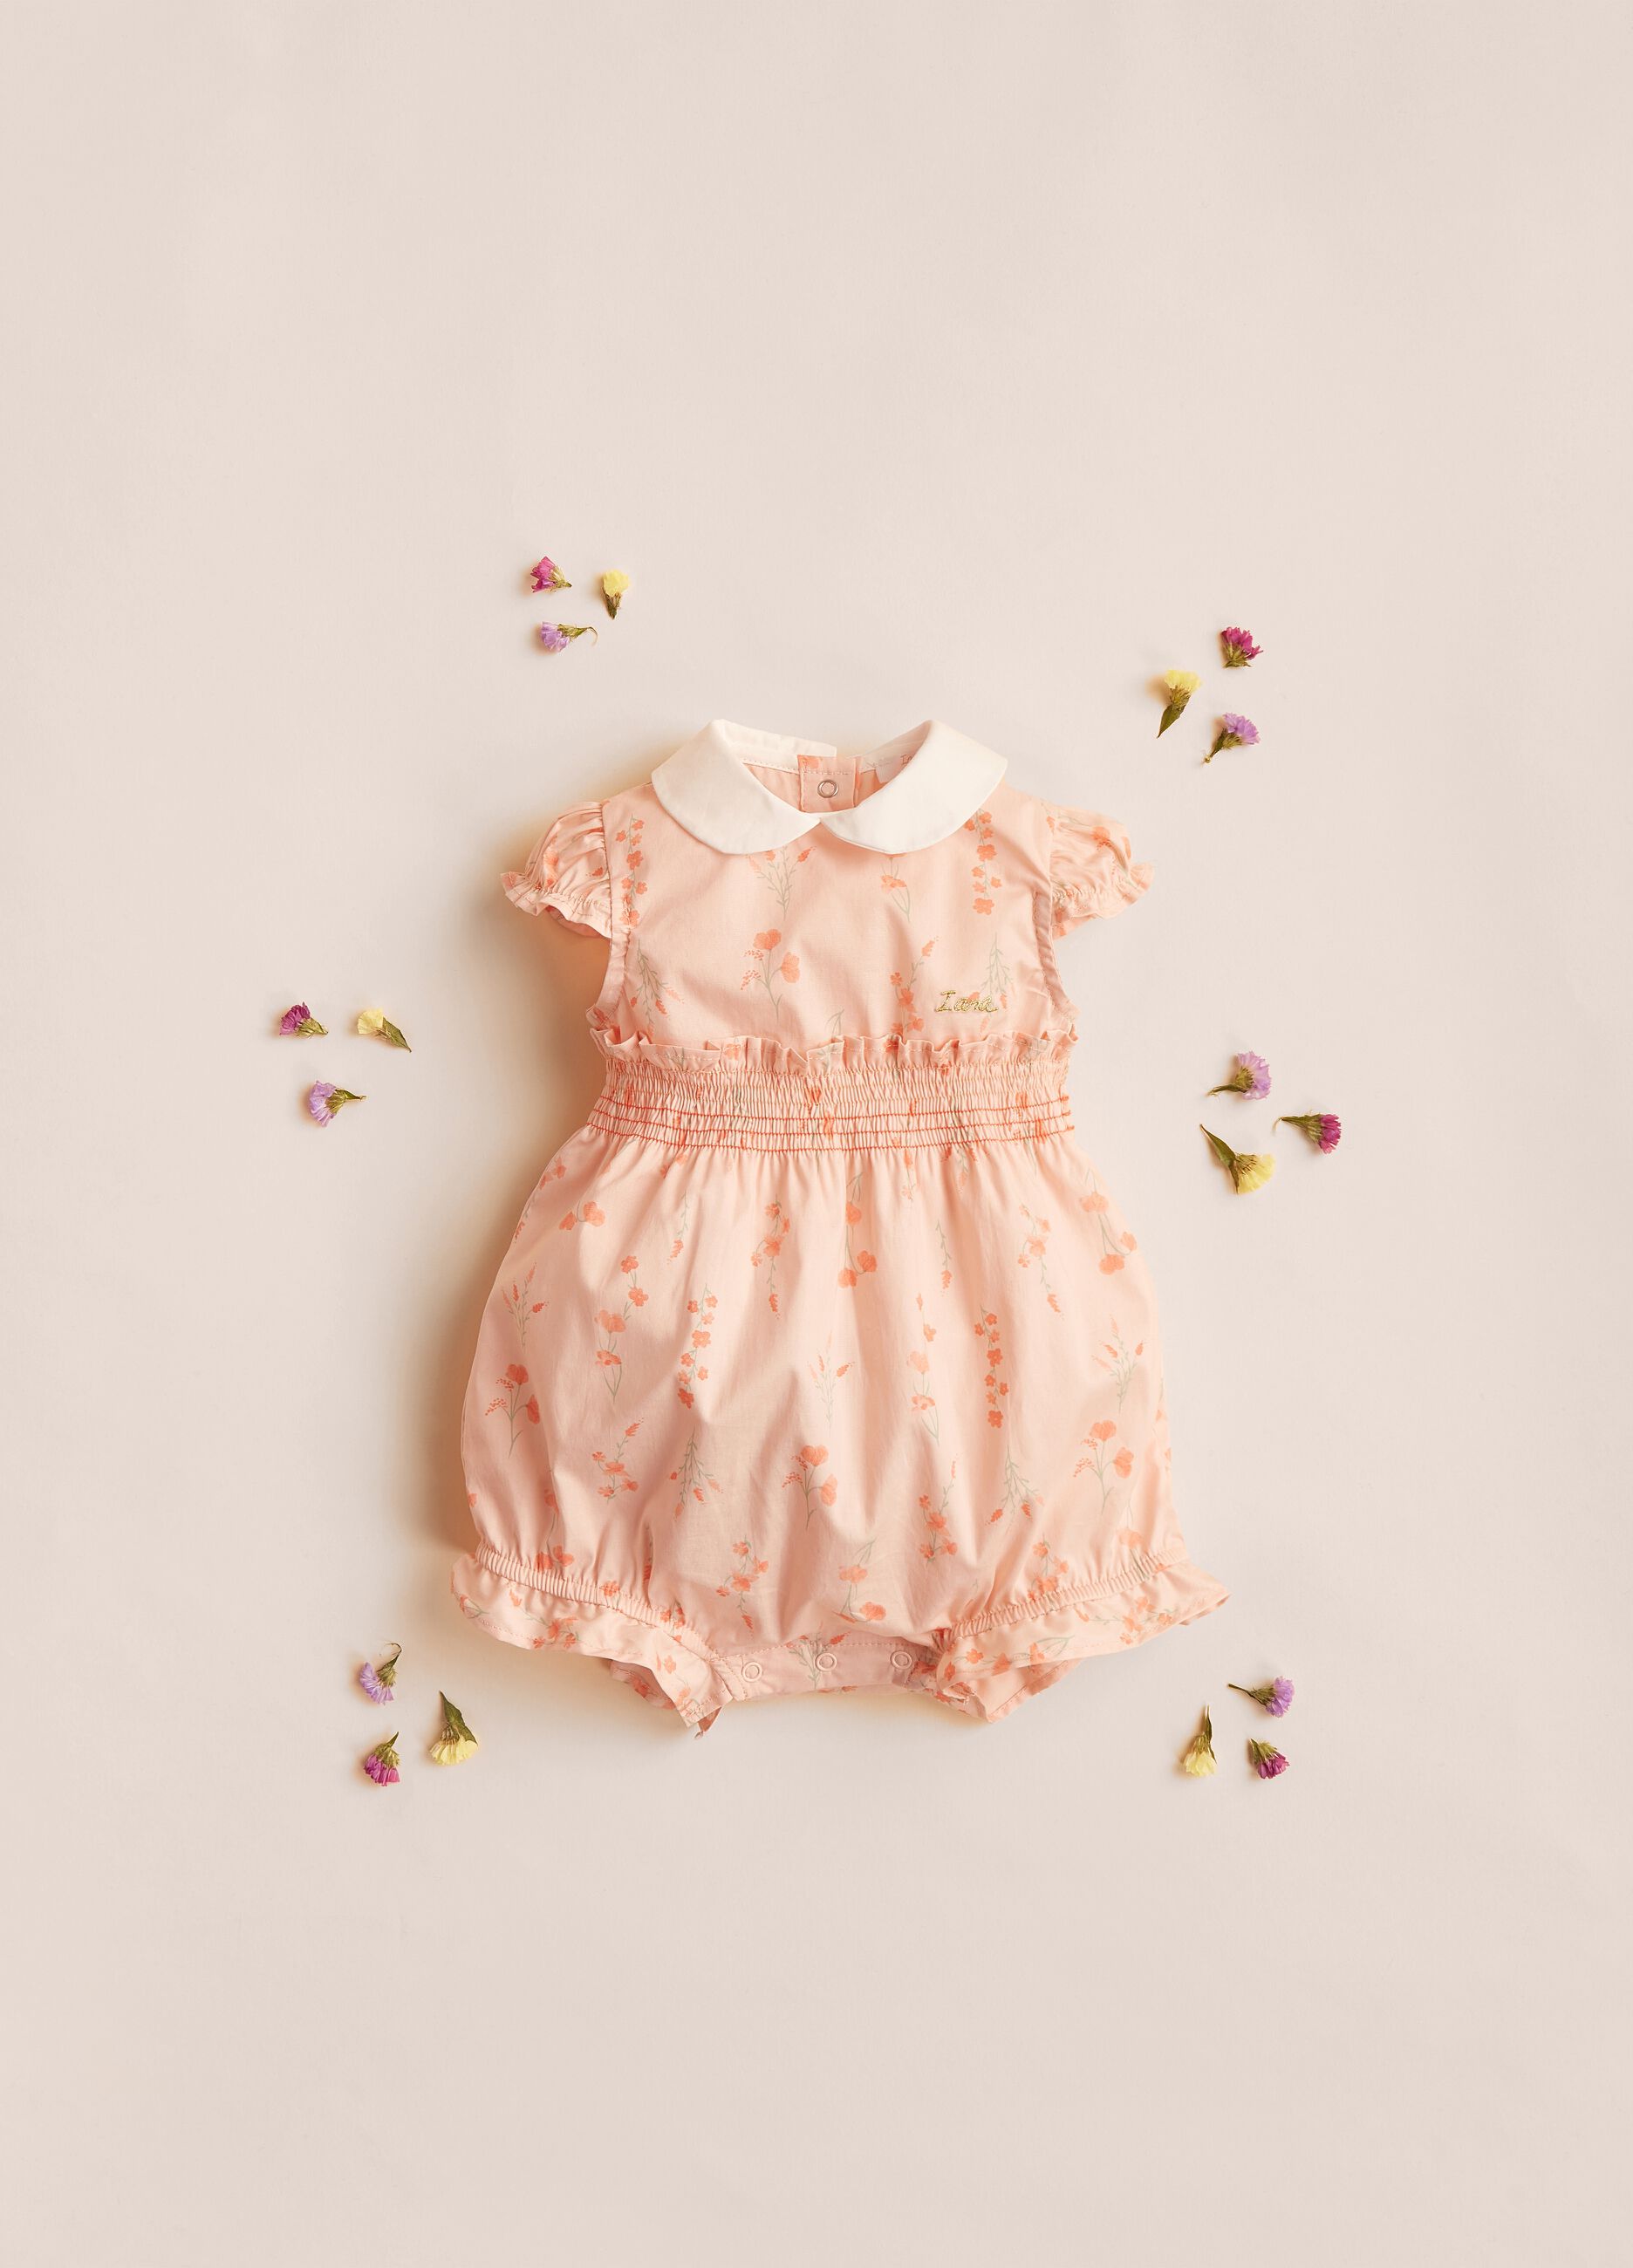 IANA stretch cotton romper suit with floral print.